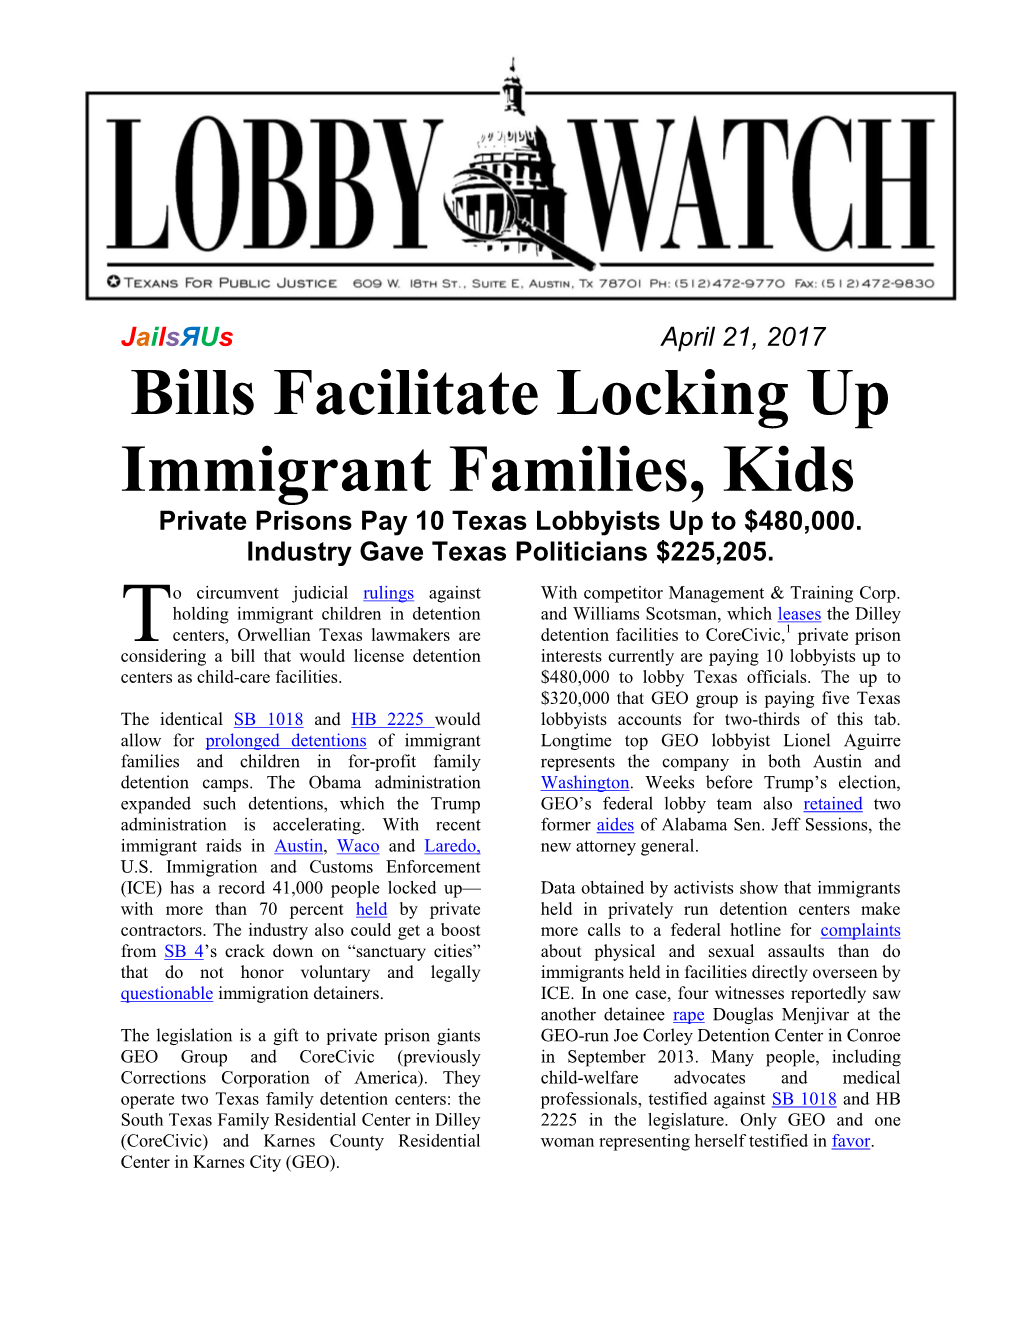 Bills Facilitate Locking up Immigrant Families, Kids Private Prisons Pay 10 Texas Lobbyists up to $480,000